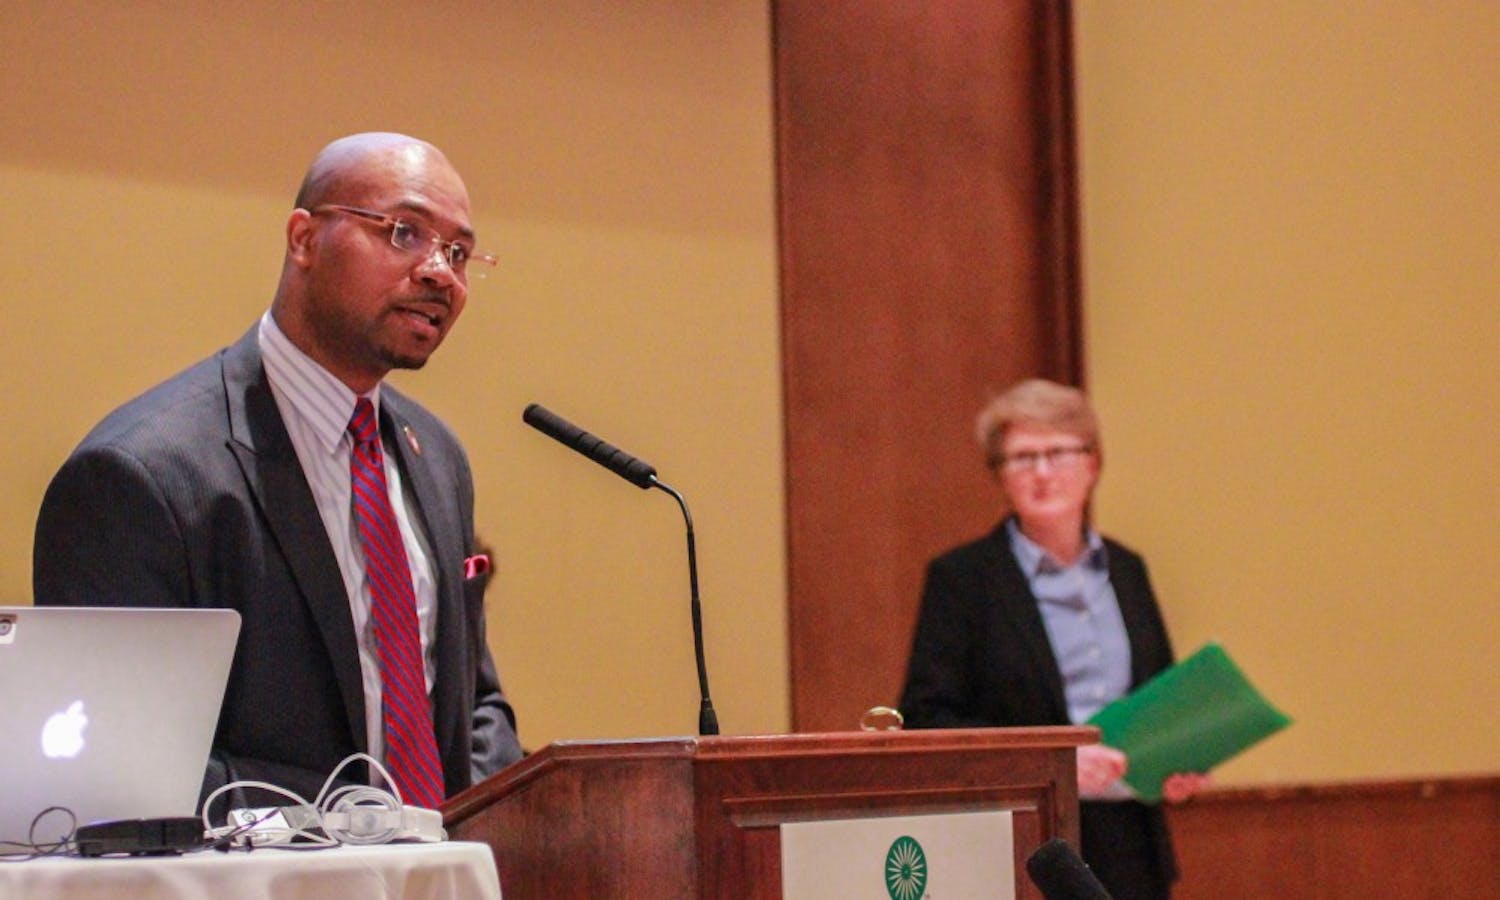 Chief Diversity Officer Patrick J. Sims and Dean of Students Lori Berquam issued a statement Tuesday highlighting the university's achievements relating to diversity on campus.&nbsp;